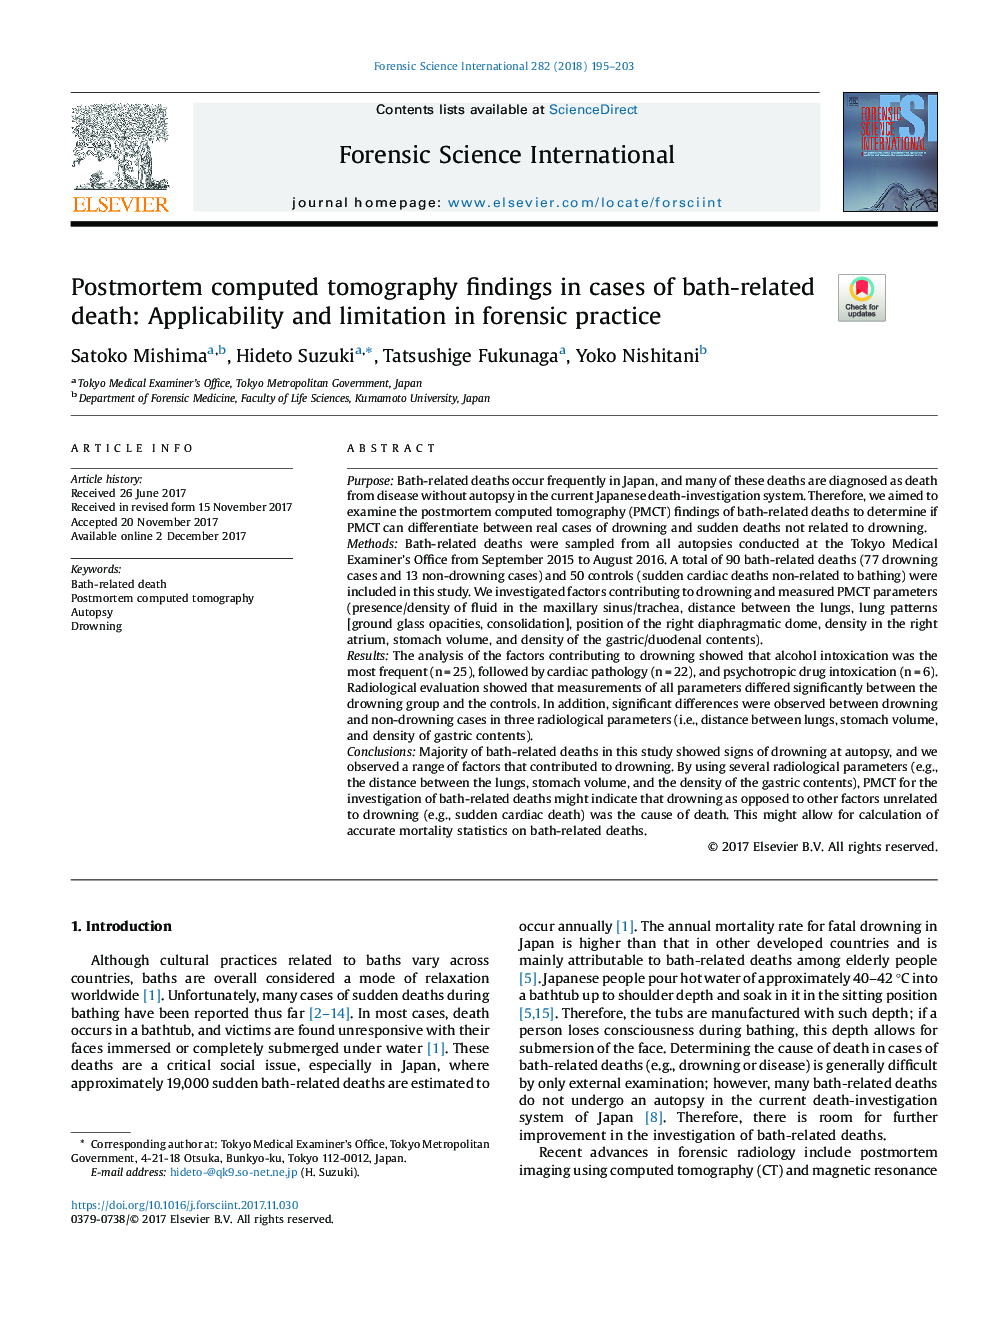 Postmortem computed tomography findings in cases of bath-related death: Applicability and limitation in forensic practice